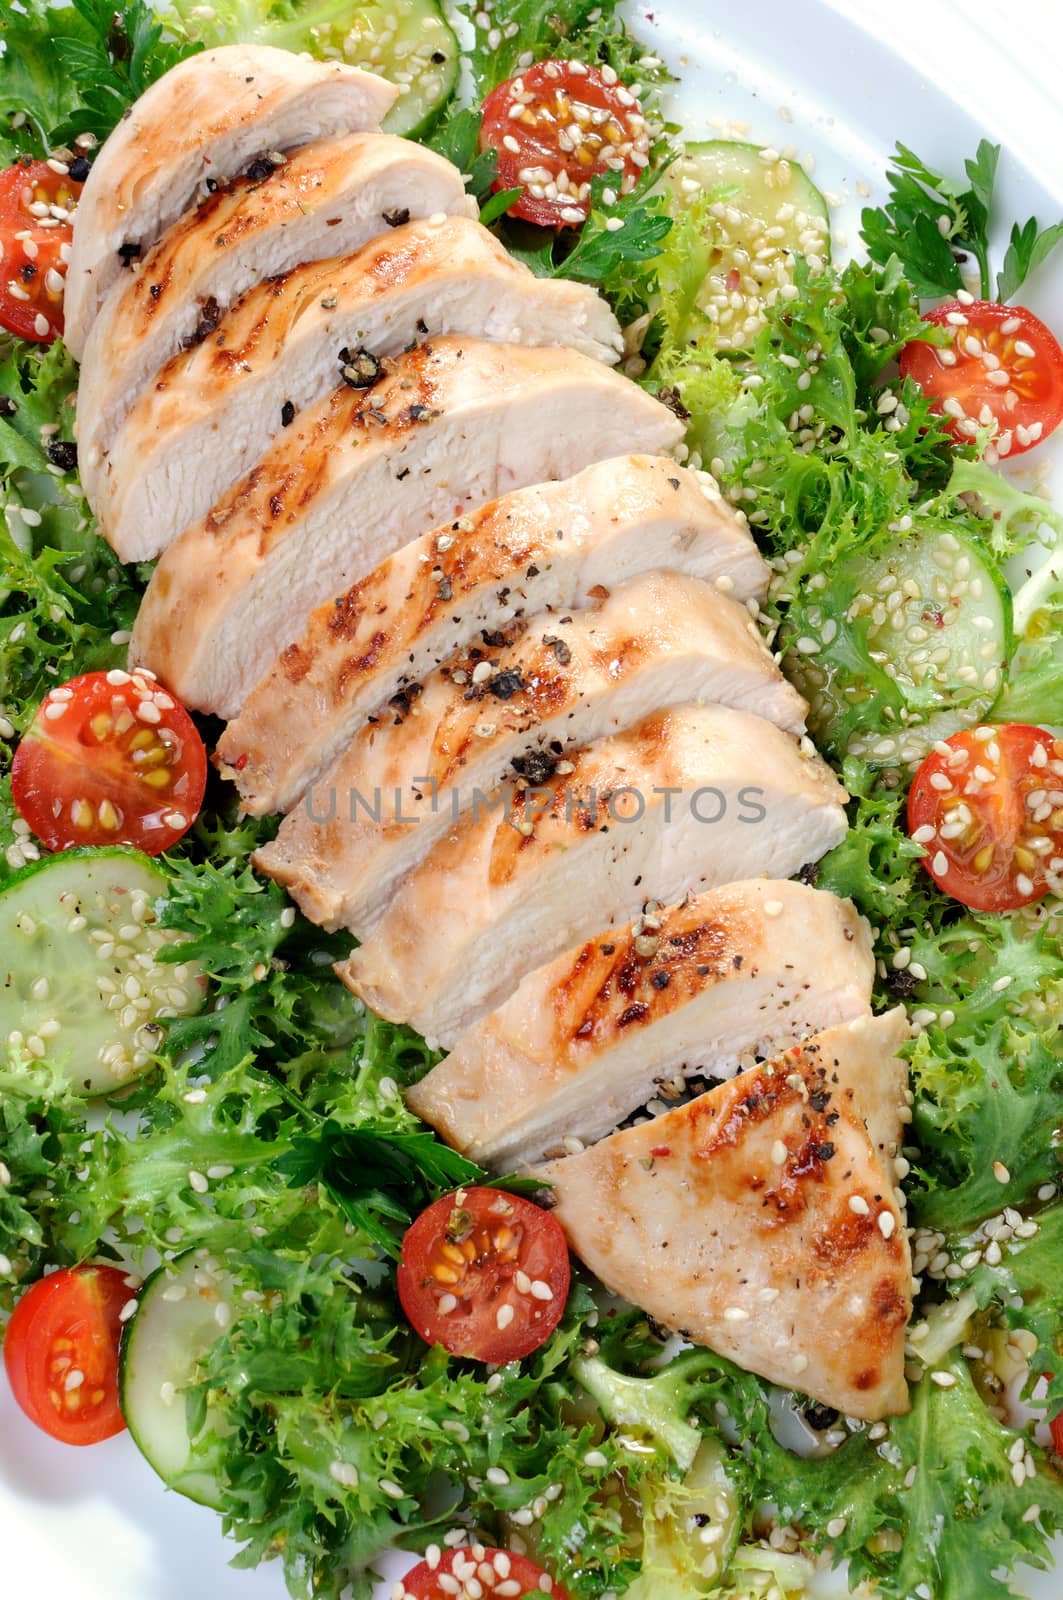 Chicken fillet in a vegetable garnish by Apolonia